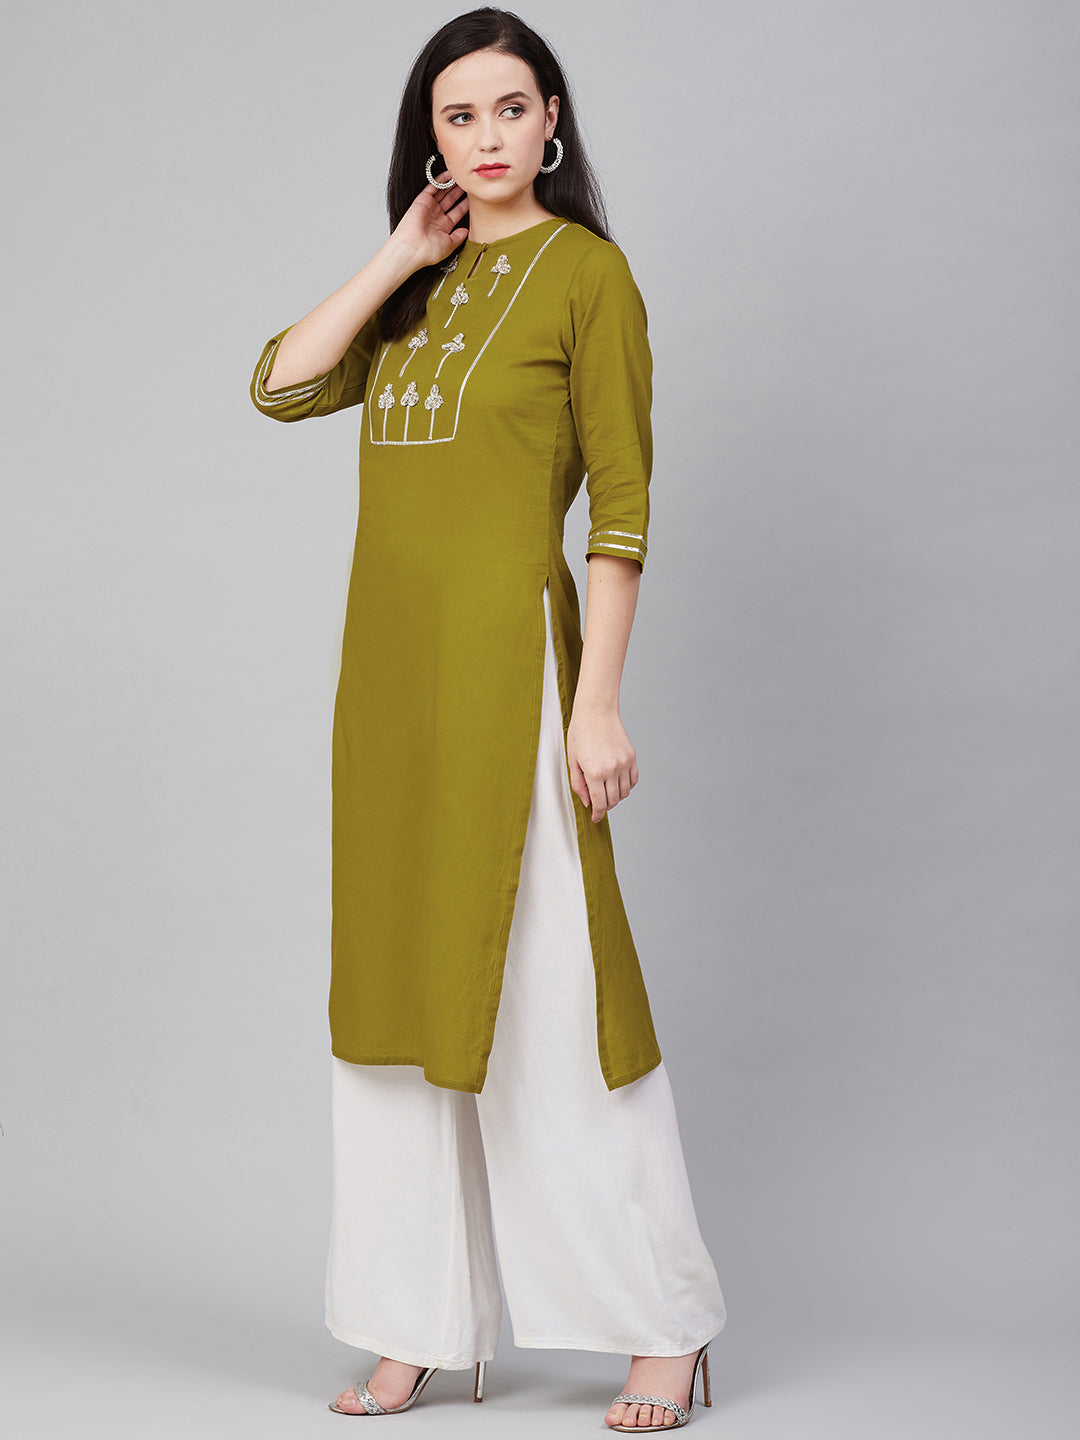 Women's Olive Green And Silver-Toned Embellished Kurta - Bhama Couture